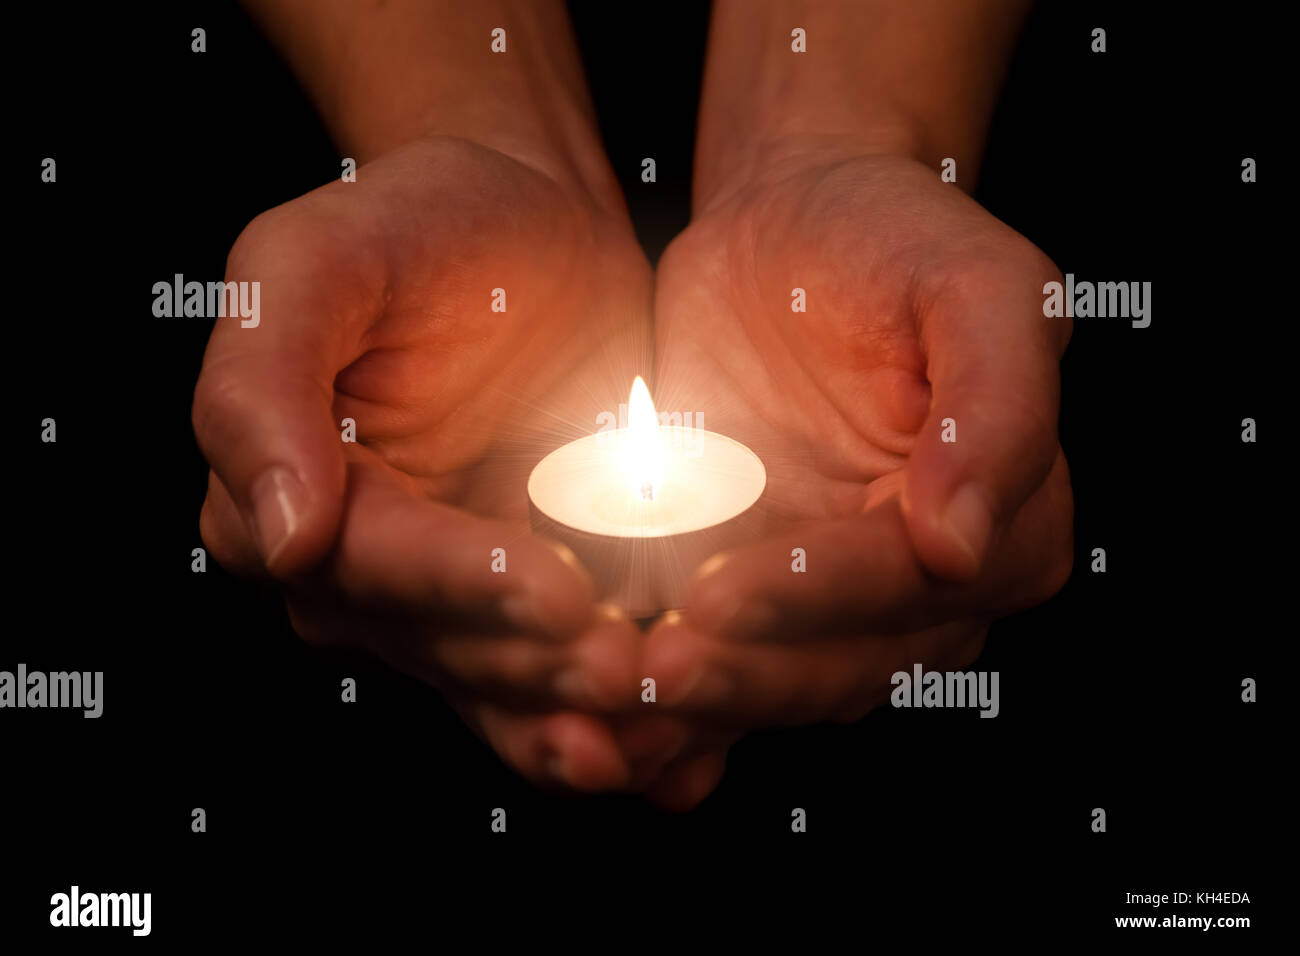 Hands holding and protecting lit or burning candle candlelight on darkness. Black background. Concept for prayer, praying, hope, vigil, night watch Stock Photo